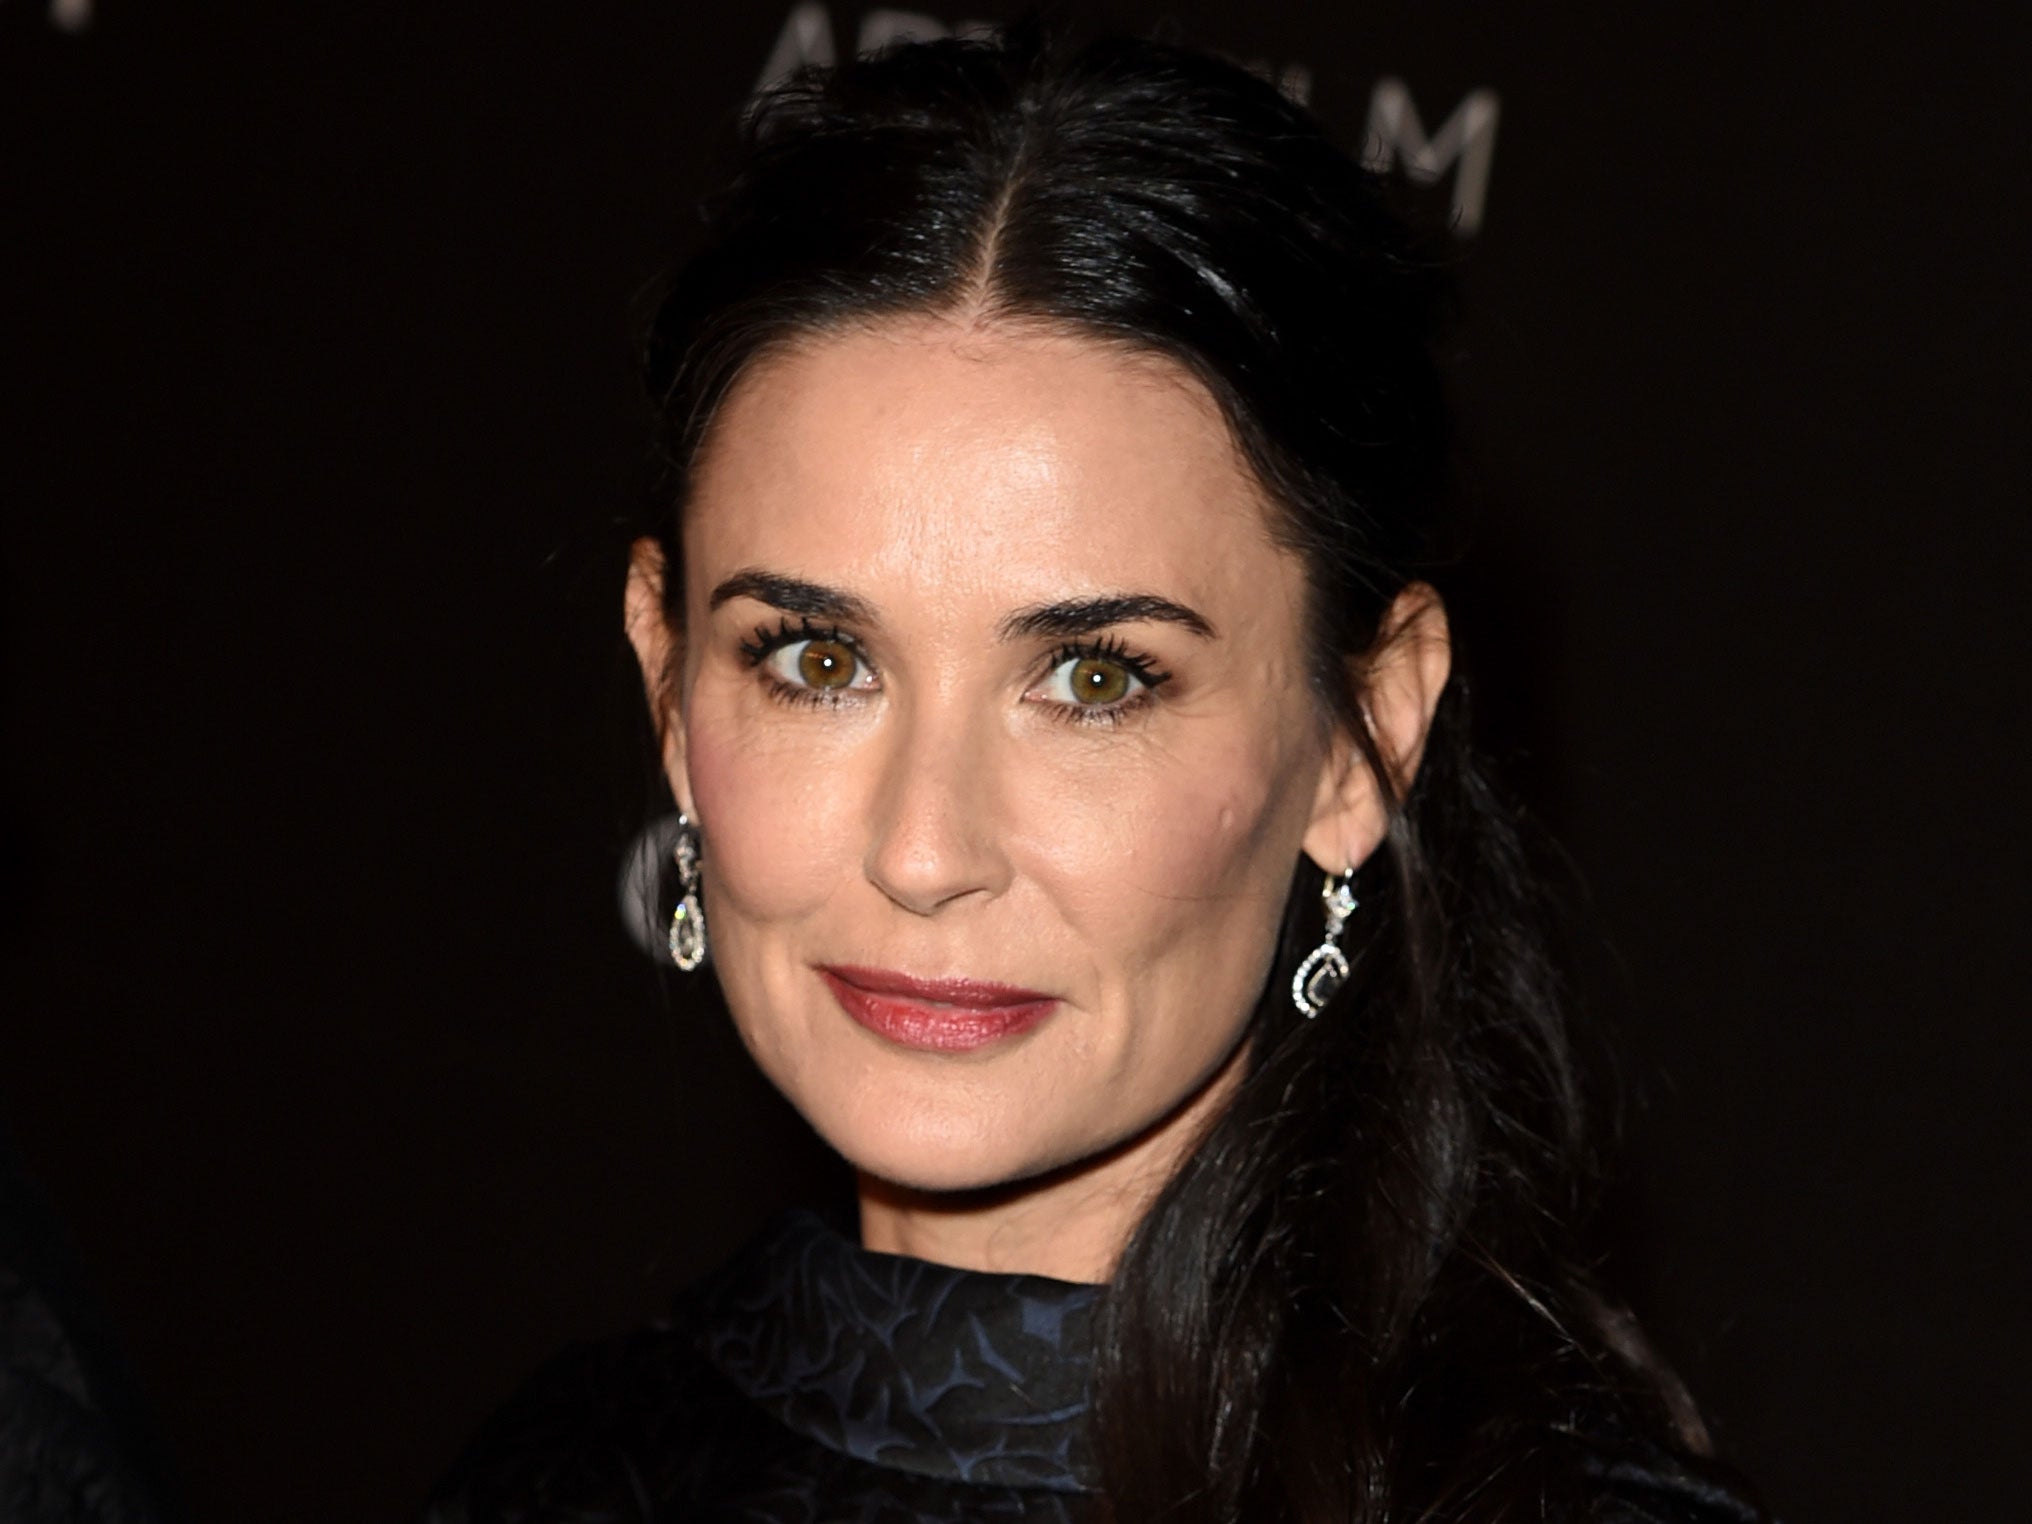 Demi Moore reveals she was raped as a teenager by man who paid her mother $500